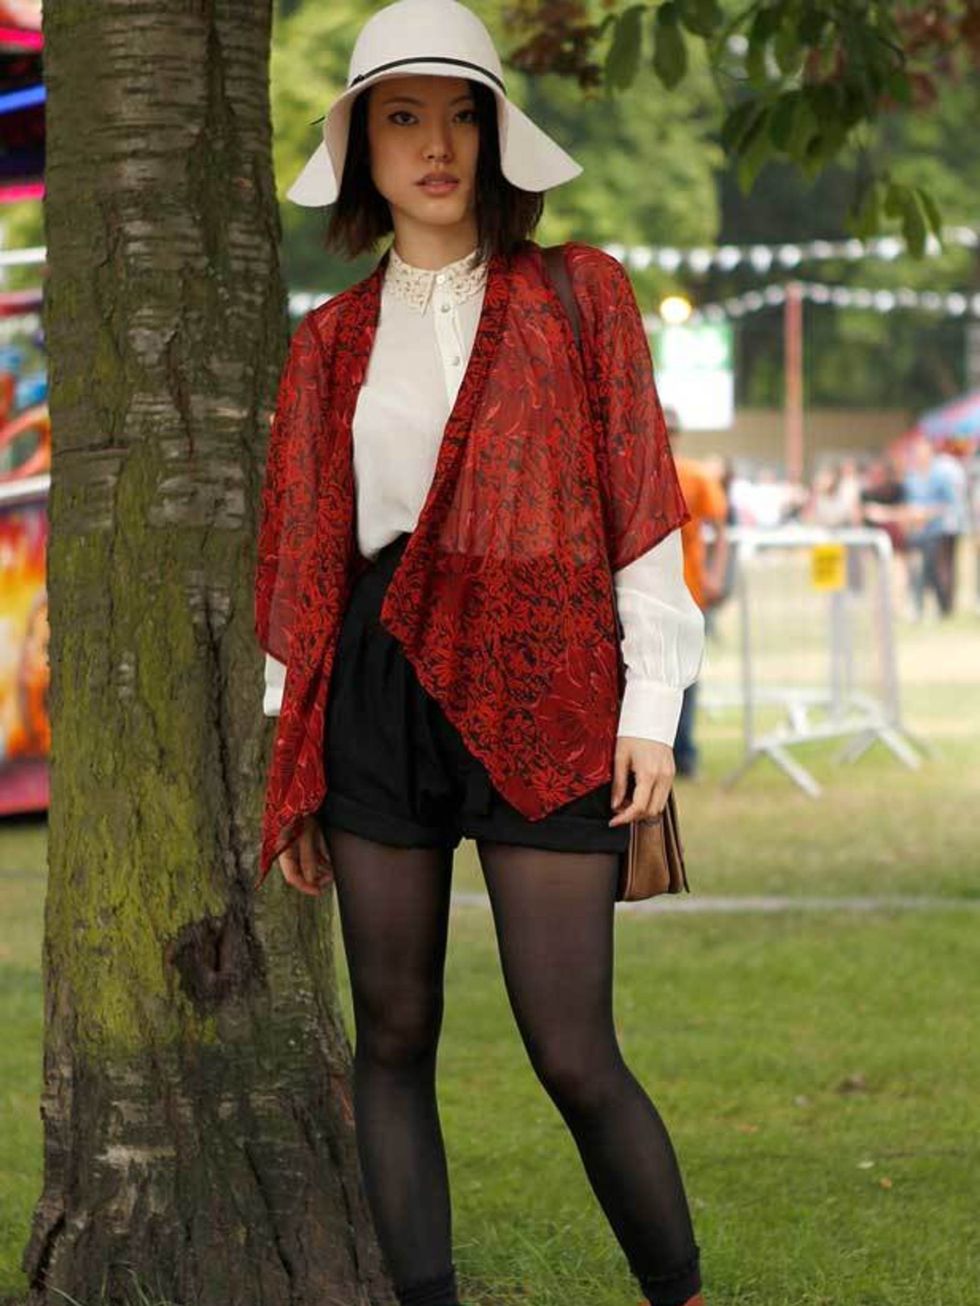 <p>Photo by Anthea Simms.Cassie, 25, Hairdresser. Topshop jacket and boots, vintage blouse, shorts and hat, bag from Pop up shop.</p>